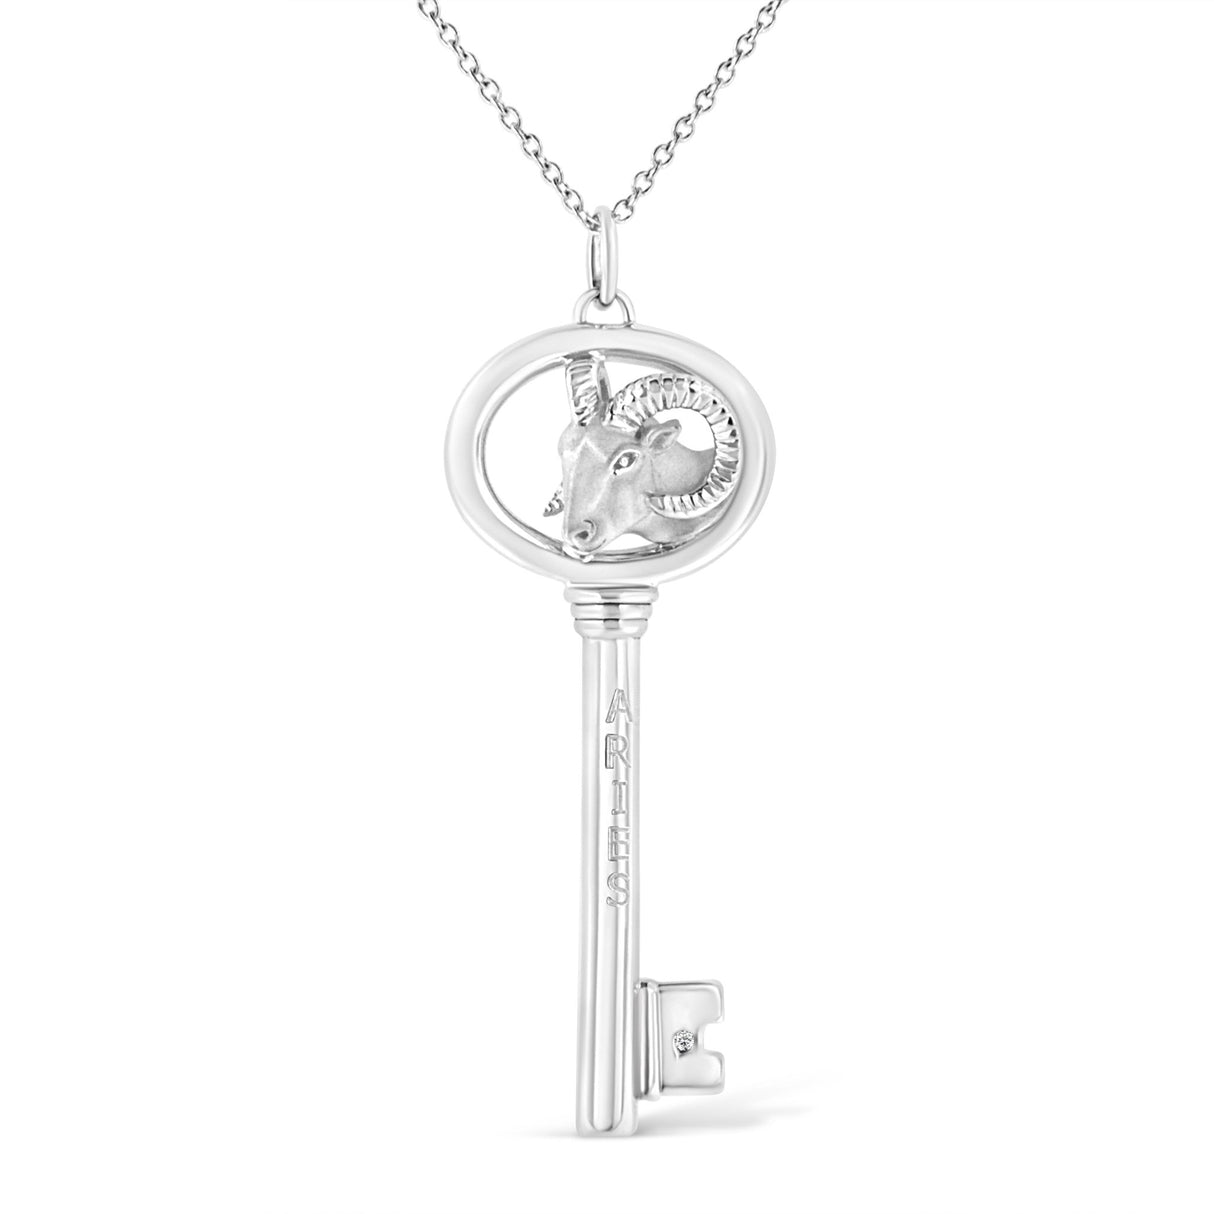 .925 Sterling Silver Diamond Accent Aries Zodiac Key 18" Pendant Necklace (K-L Color, I1-I2 Clarity) - Tuesday Morning-Pendant Necklace